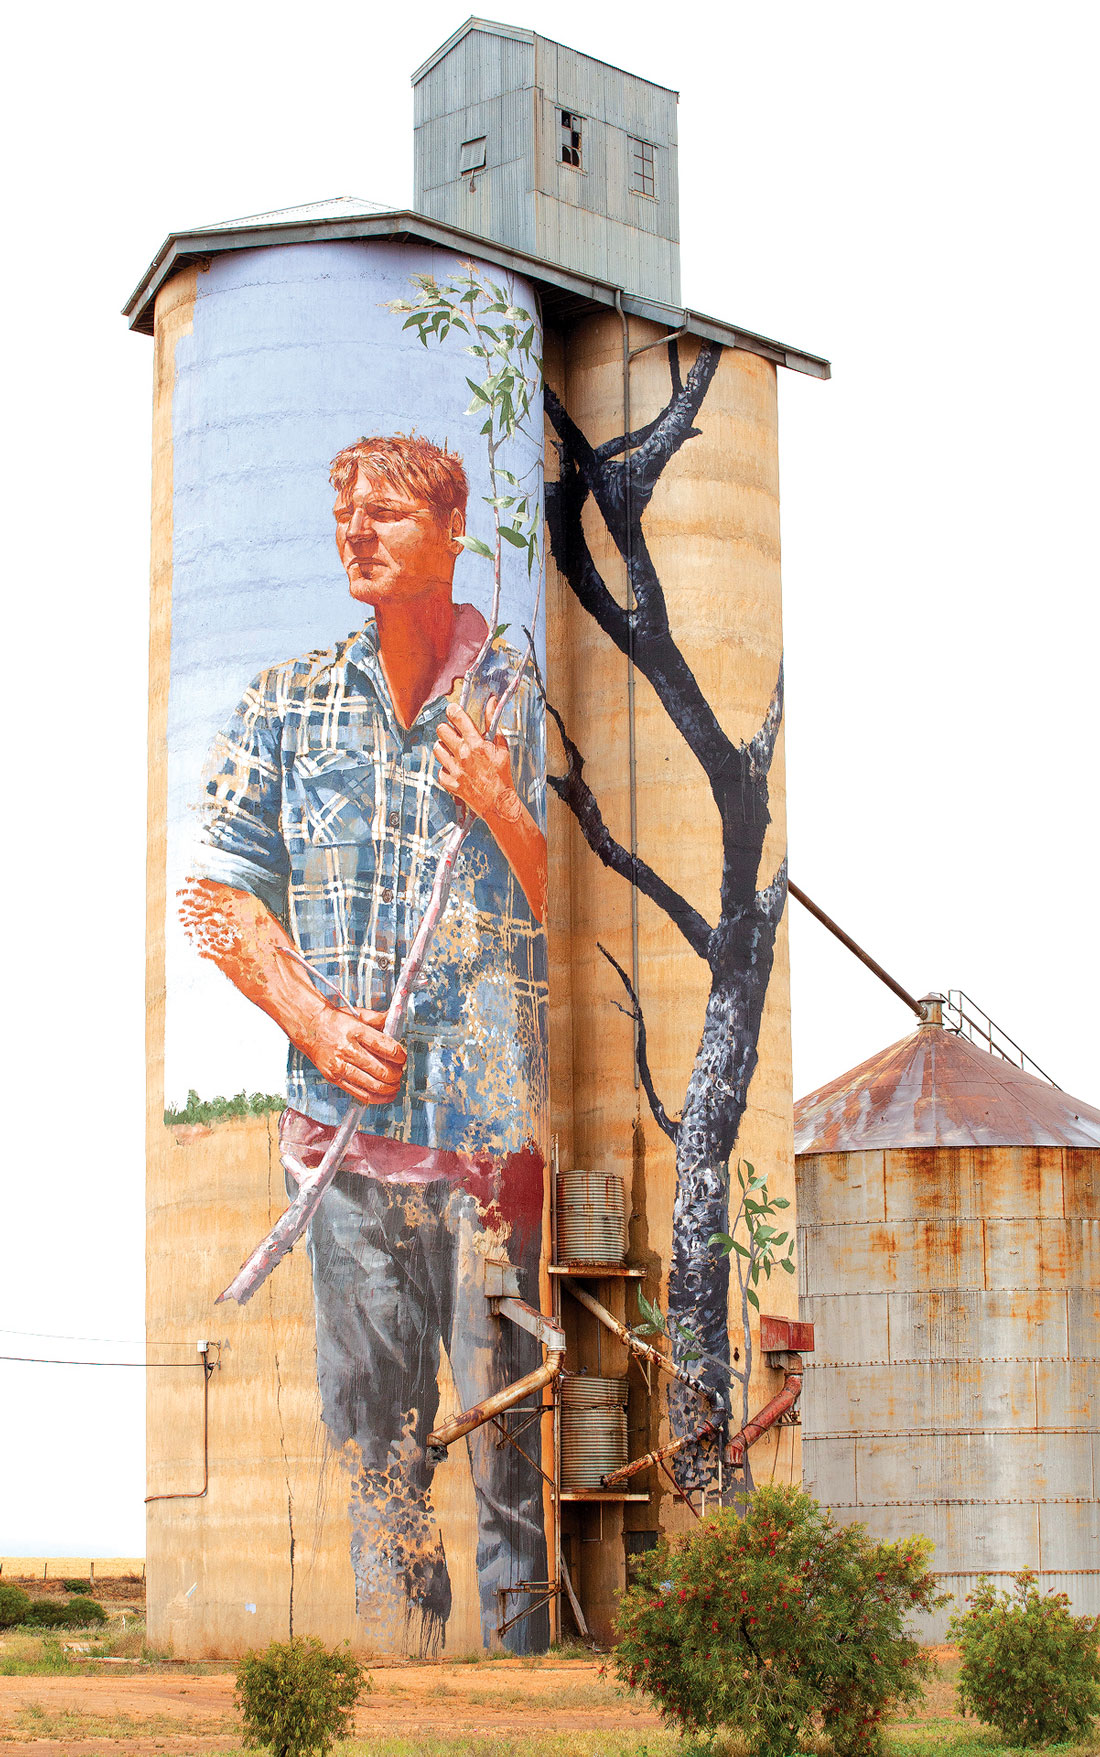 painted silo in Patchewollock